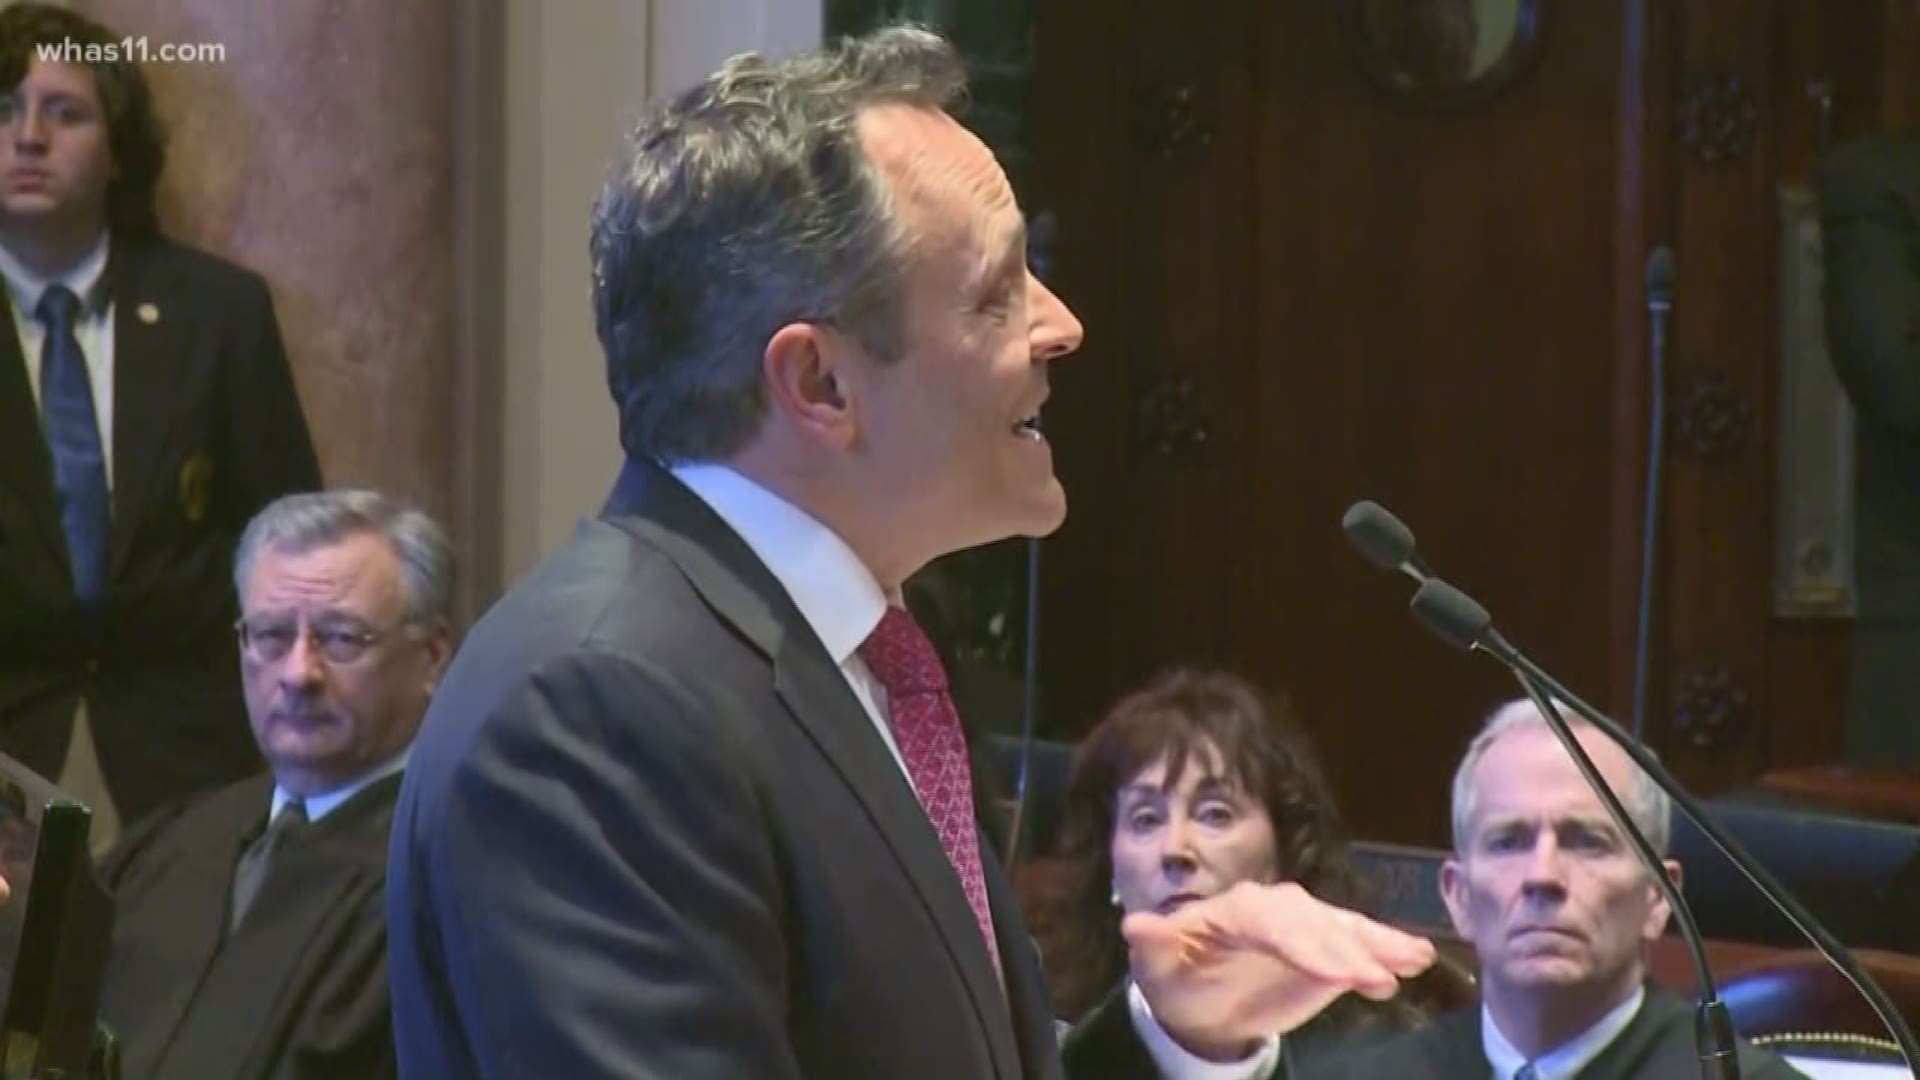 Governor Matt Bevin spent the evening describing what he means when he uses the phrase "we are Kentucky."